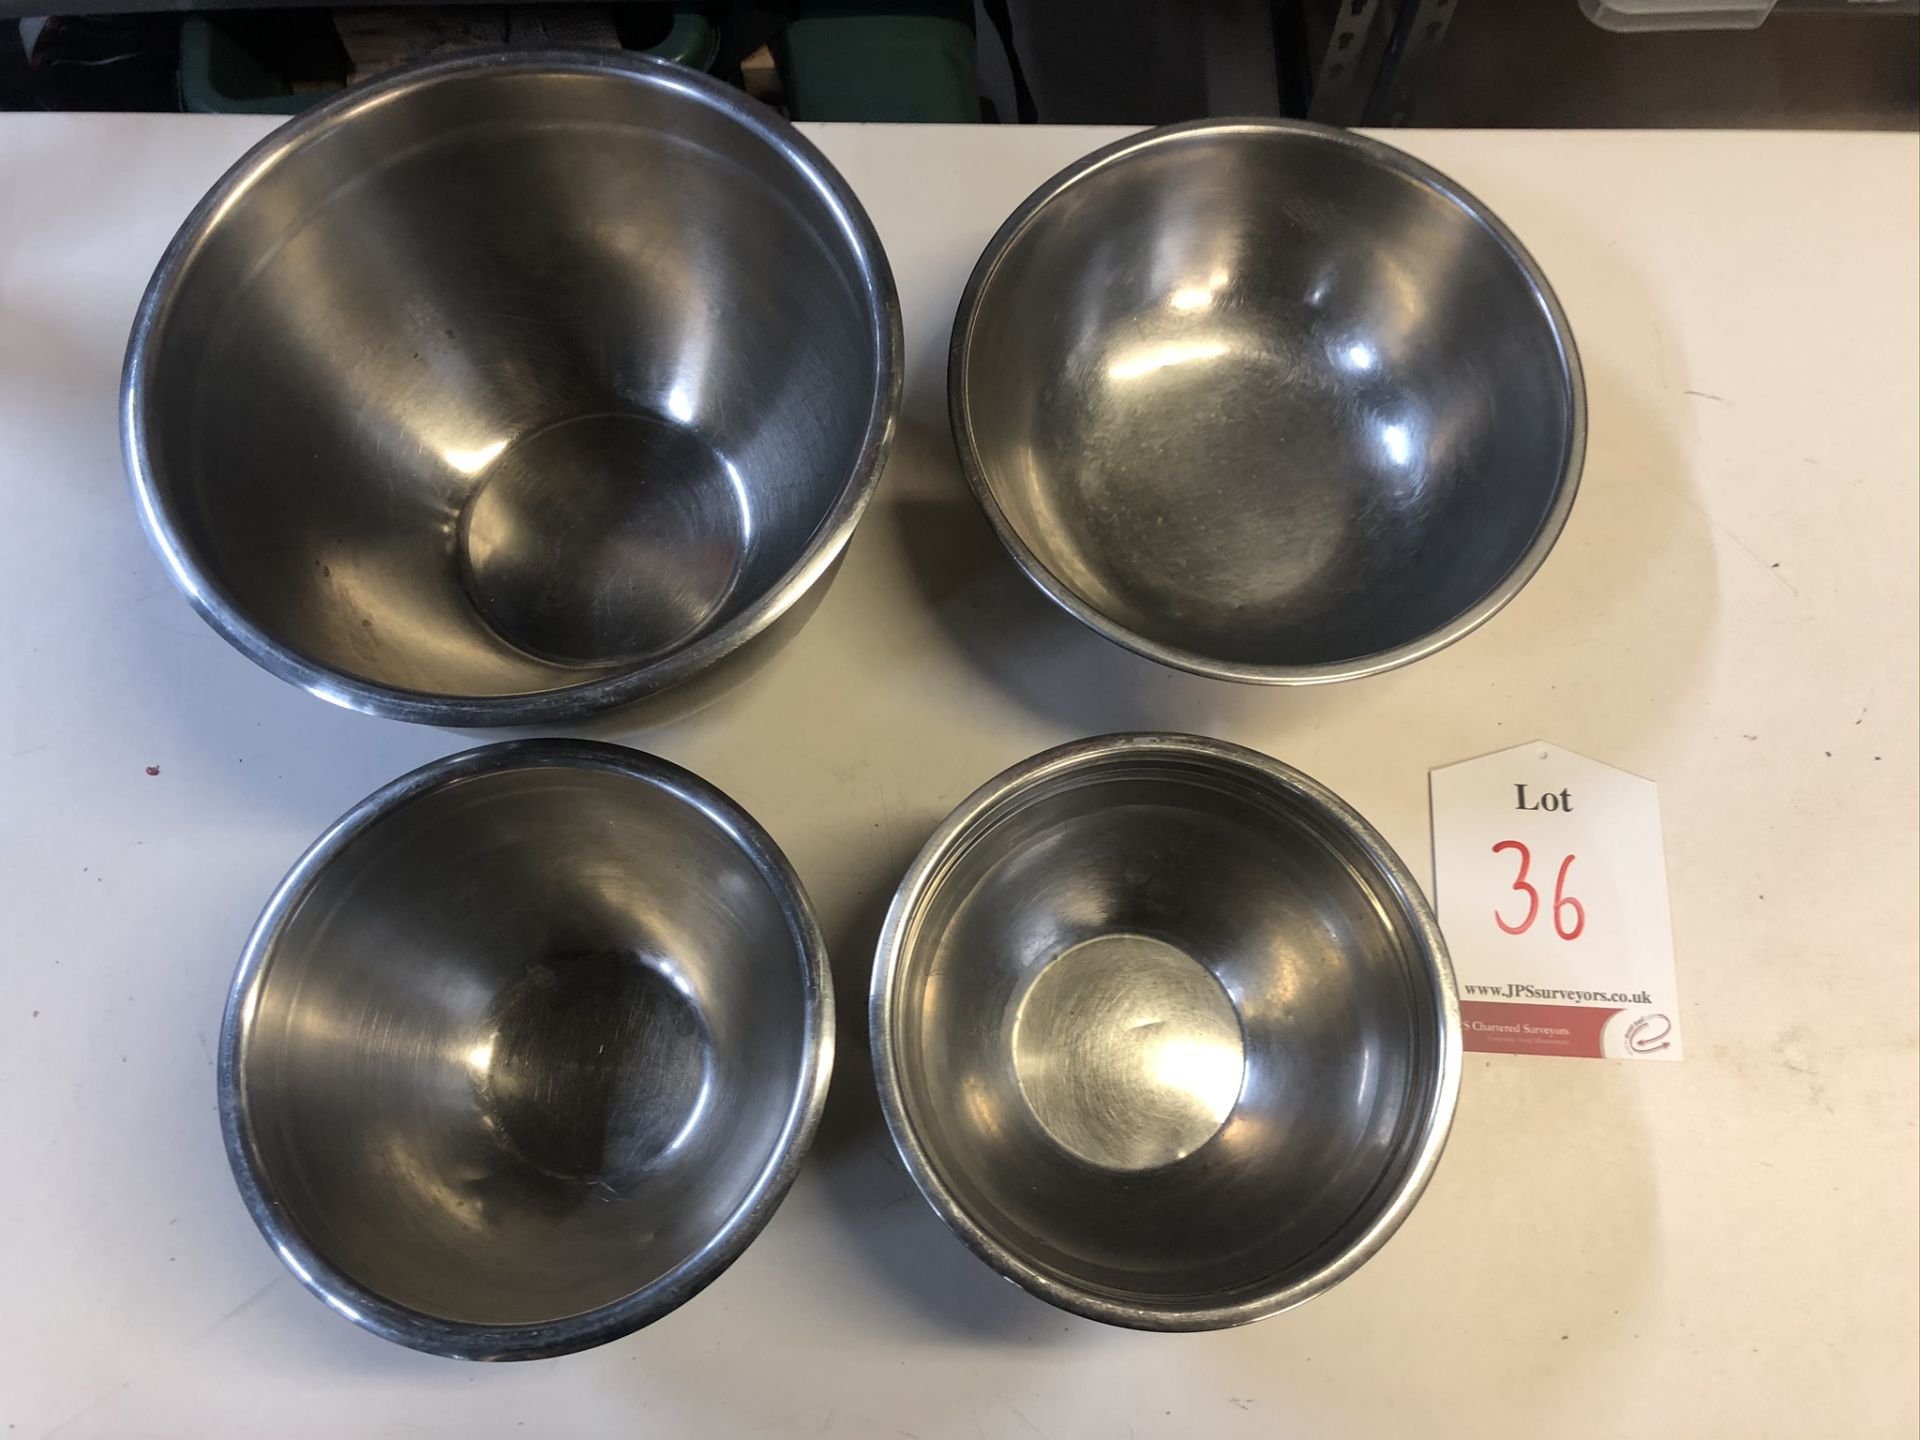 3 x Stainless Steel Mixing Bowls